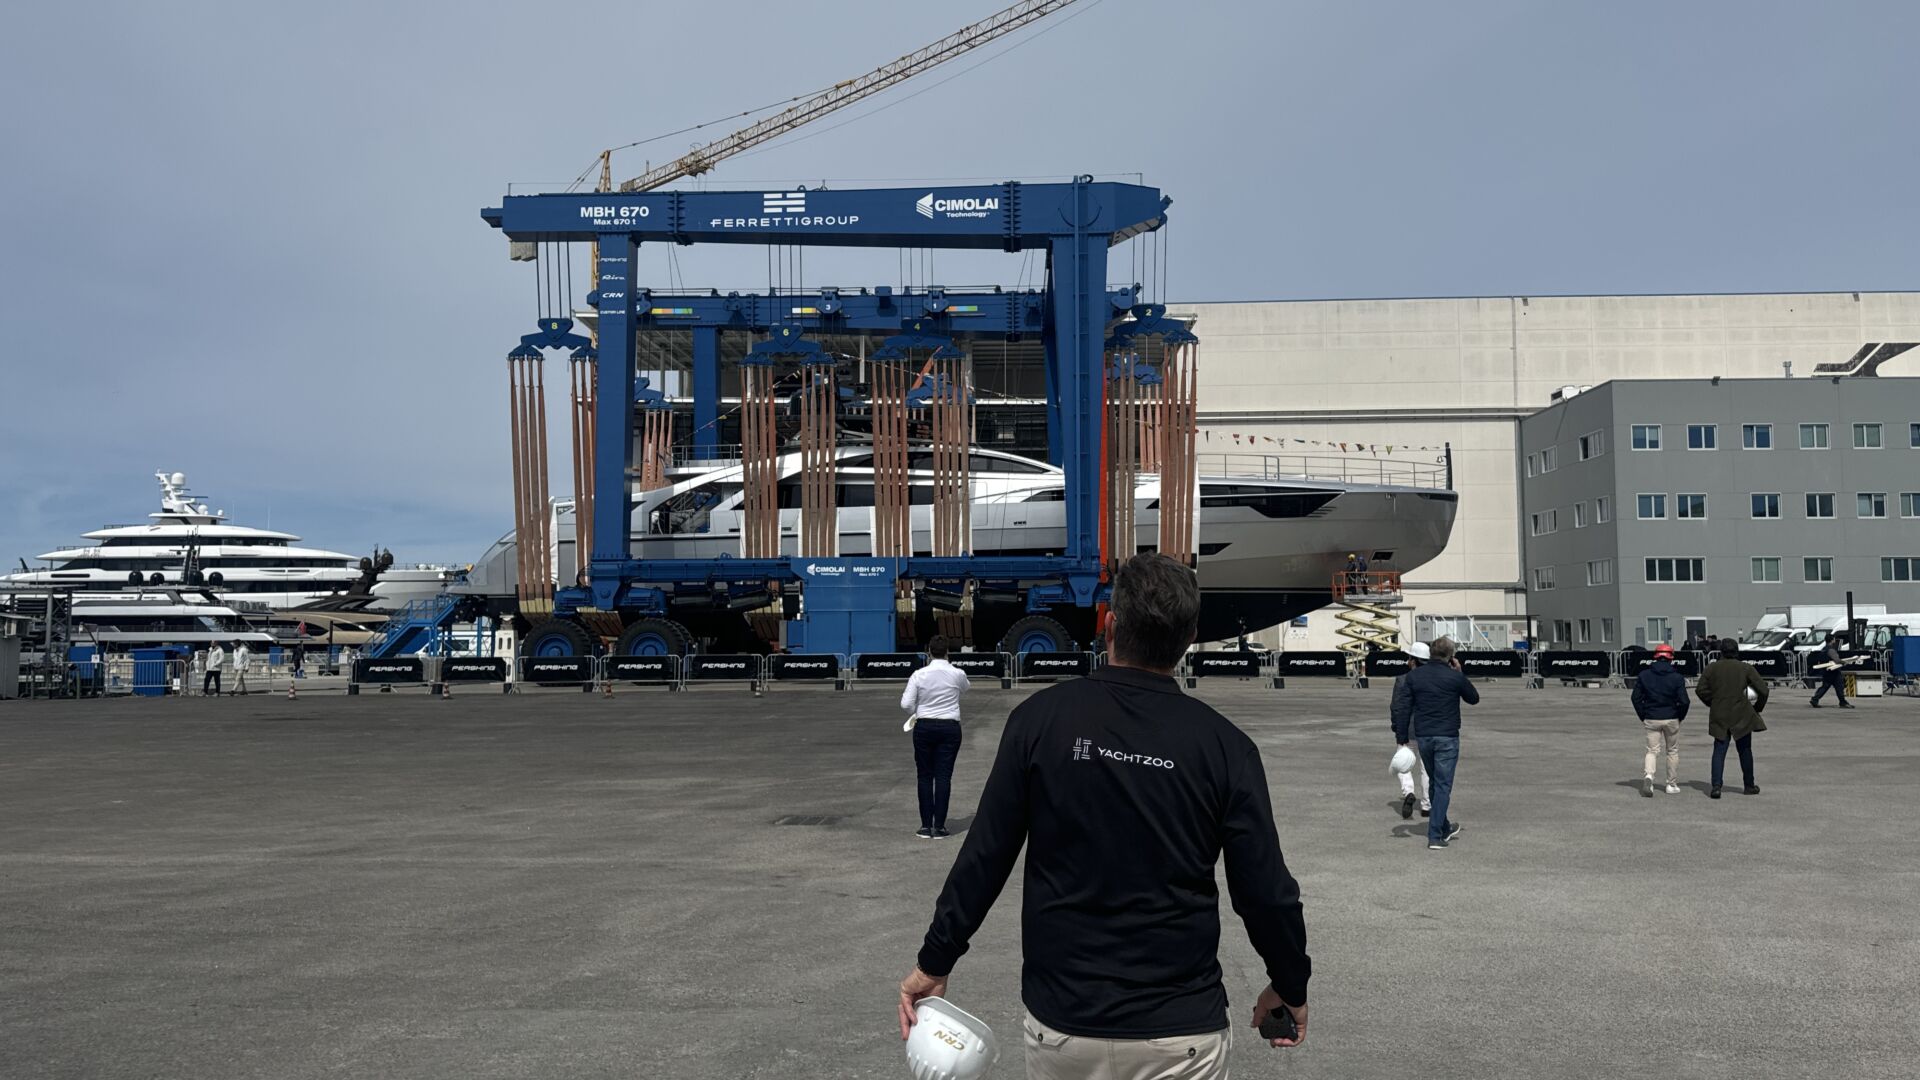 Sold and launched! The 4th Pershing 140 hull